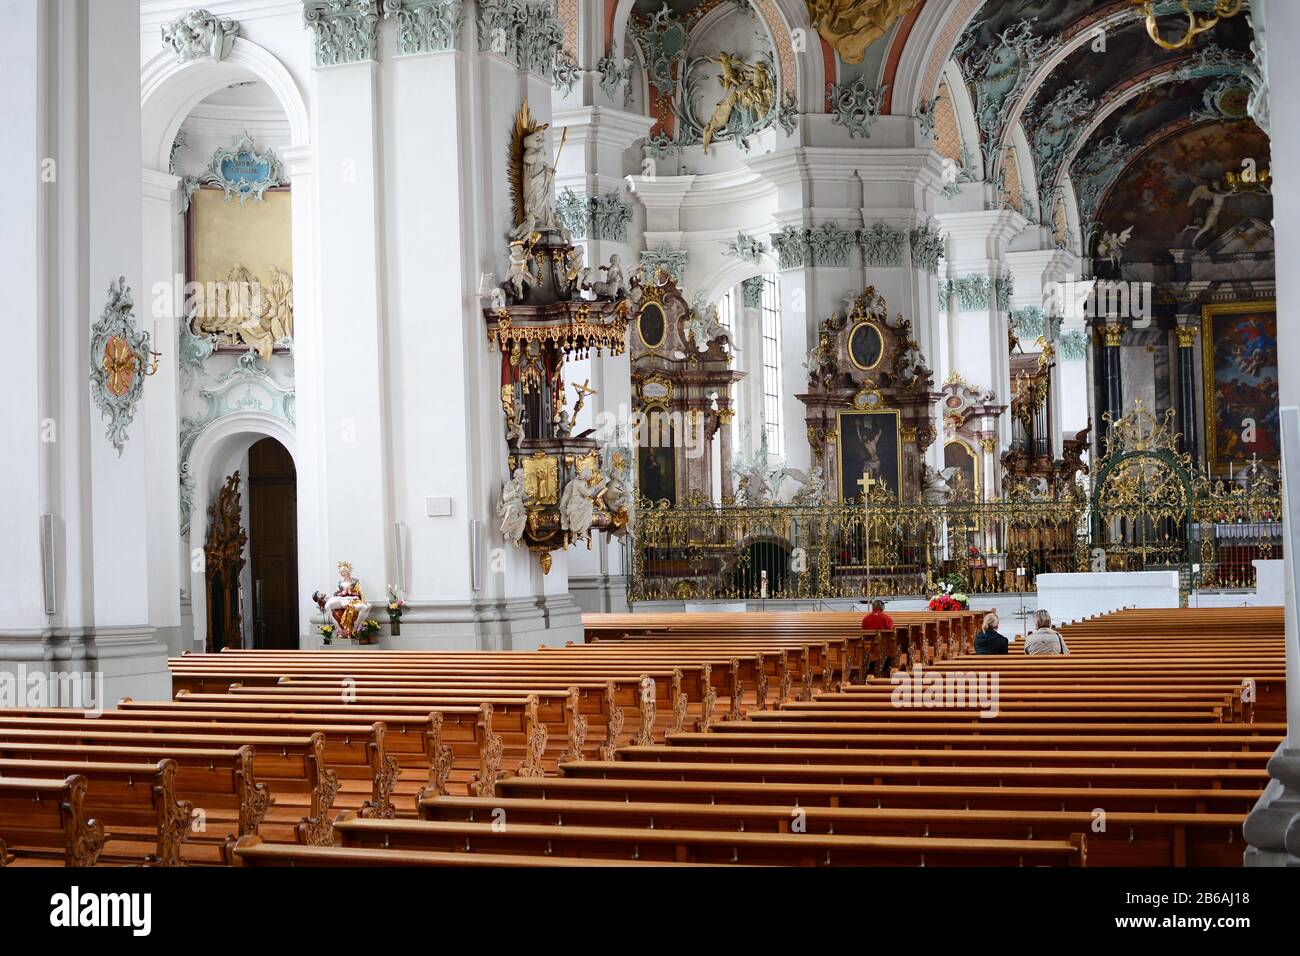 ST. GALLEN, SWITZERLAND - JULY 10, 2014: The Abbey of Saint Gall. The Roman Catholic Cathedral, in existance since 719, has been a UNESCO World Herita Stock Photo